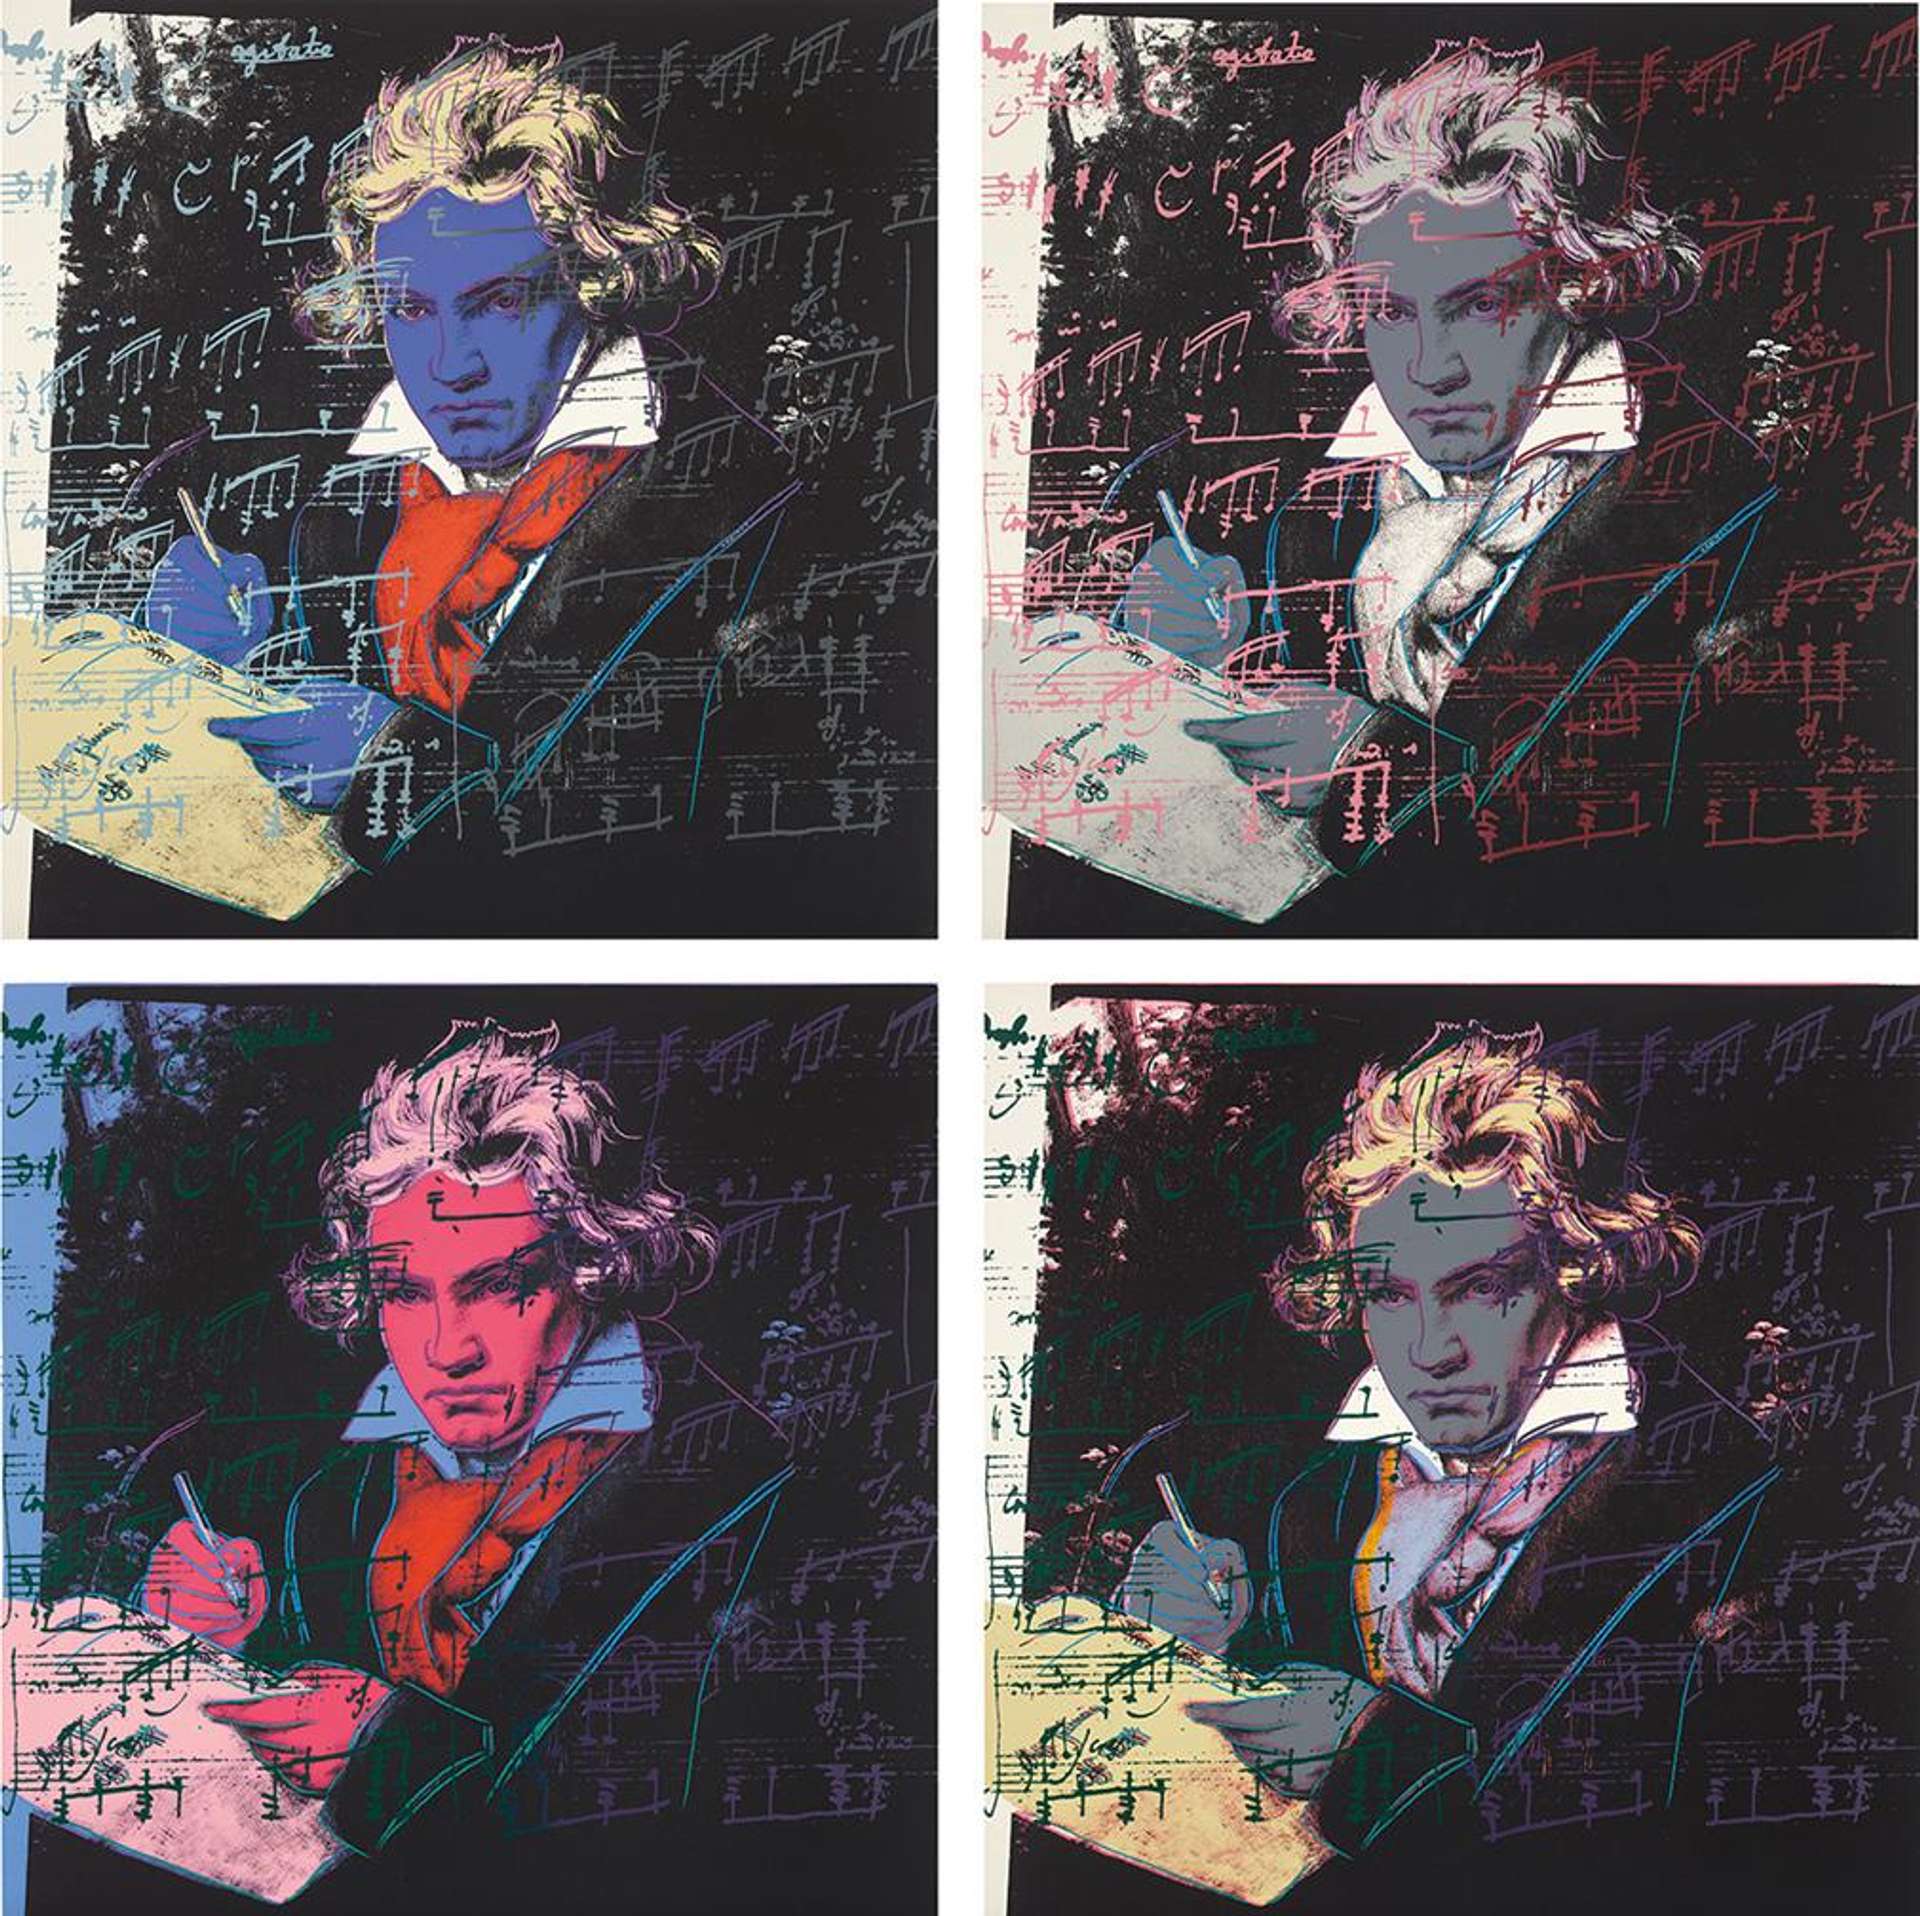 A set of four screenprints by Andy Warhol depicting the composer Beethoven in different bold colourways.